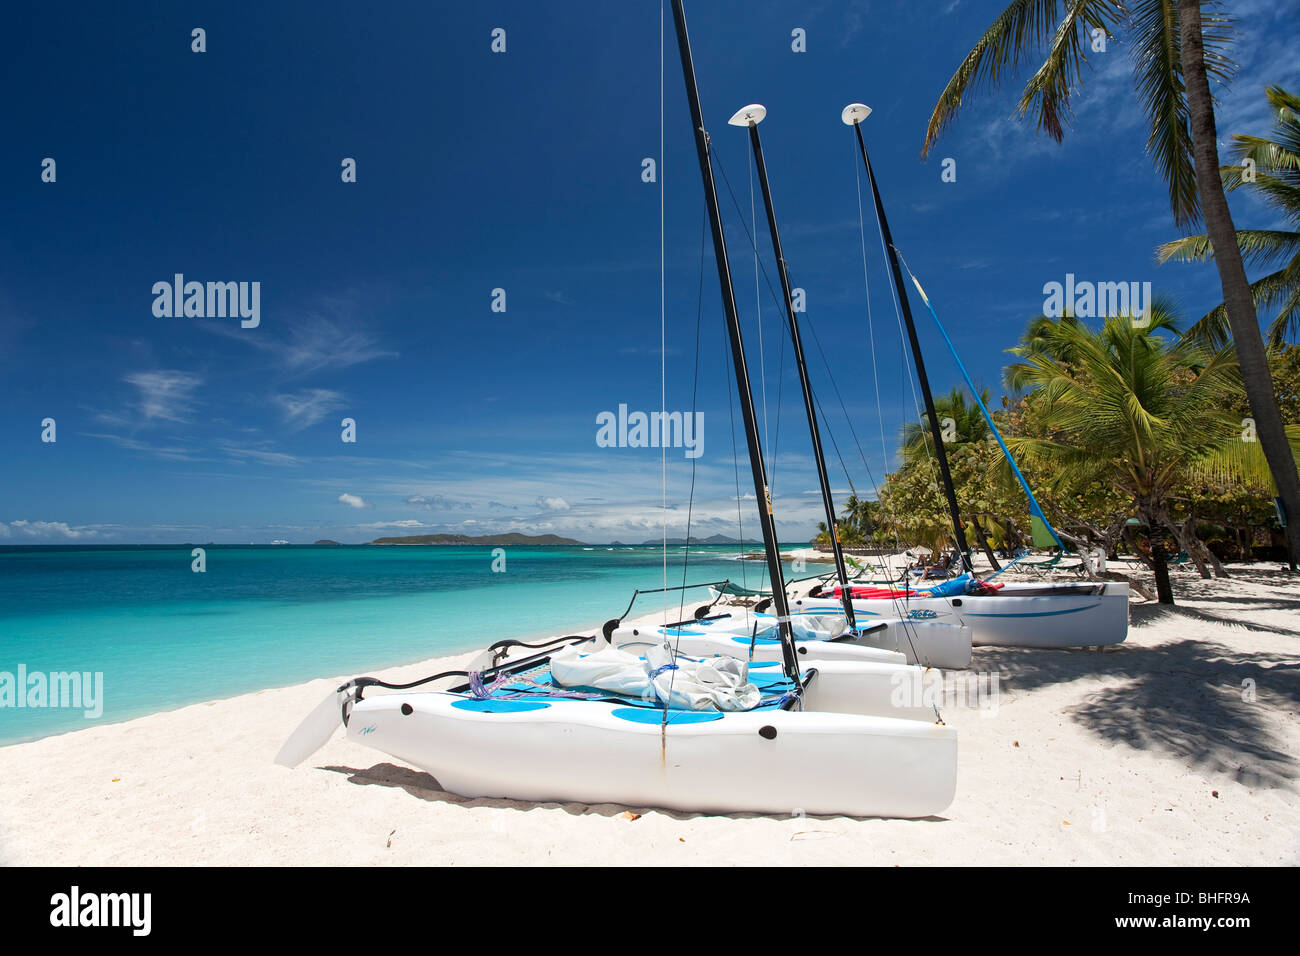 Hobie Cats wait to be used, Palm Island, St. Vincent and the Grenadines Stock Photo